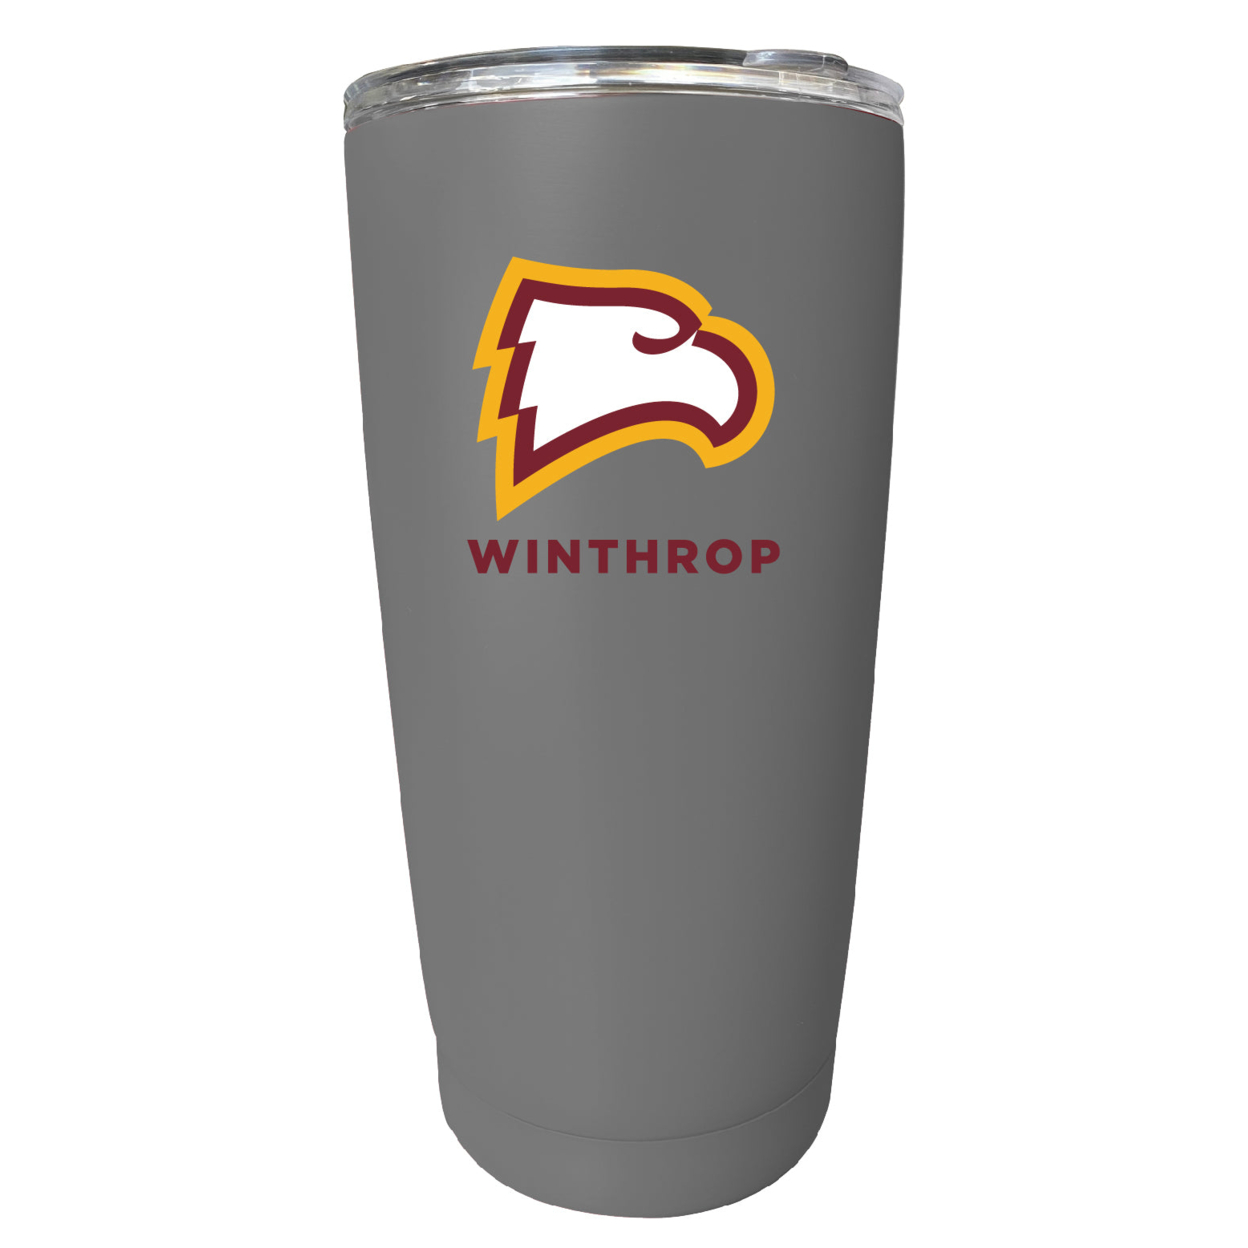 Winthrop University 16 Oz Stainless Steel Insulated Tumbler - Gray